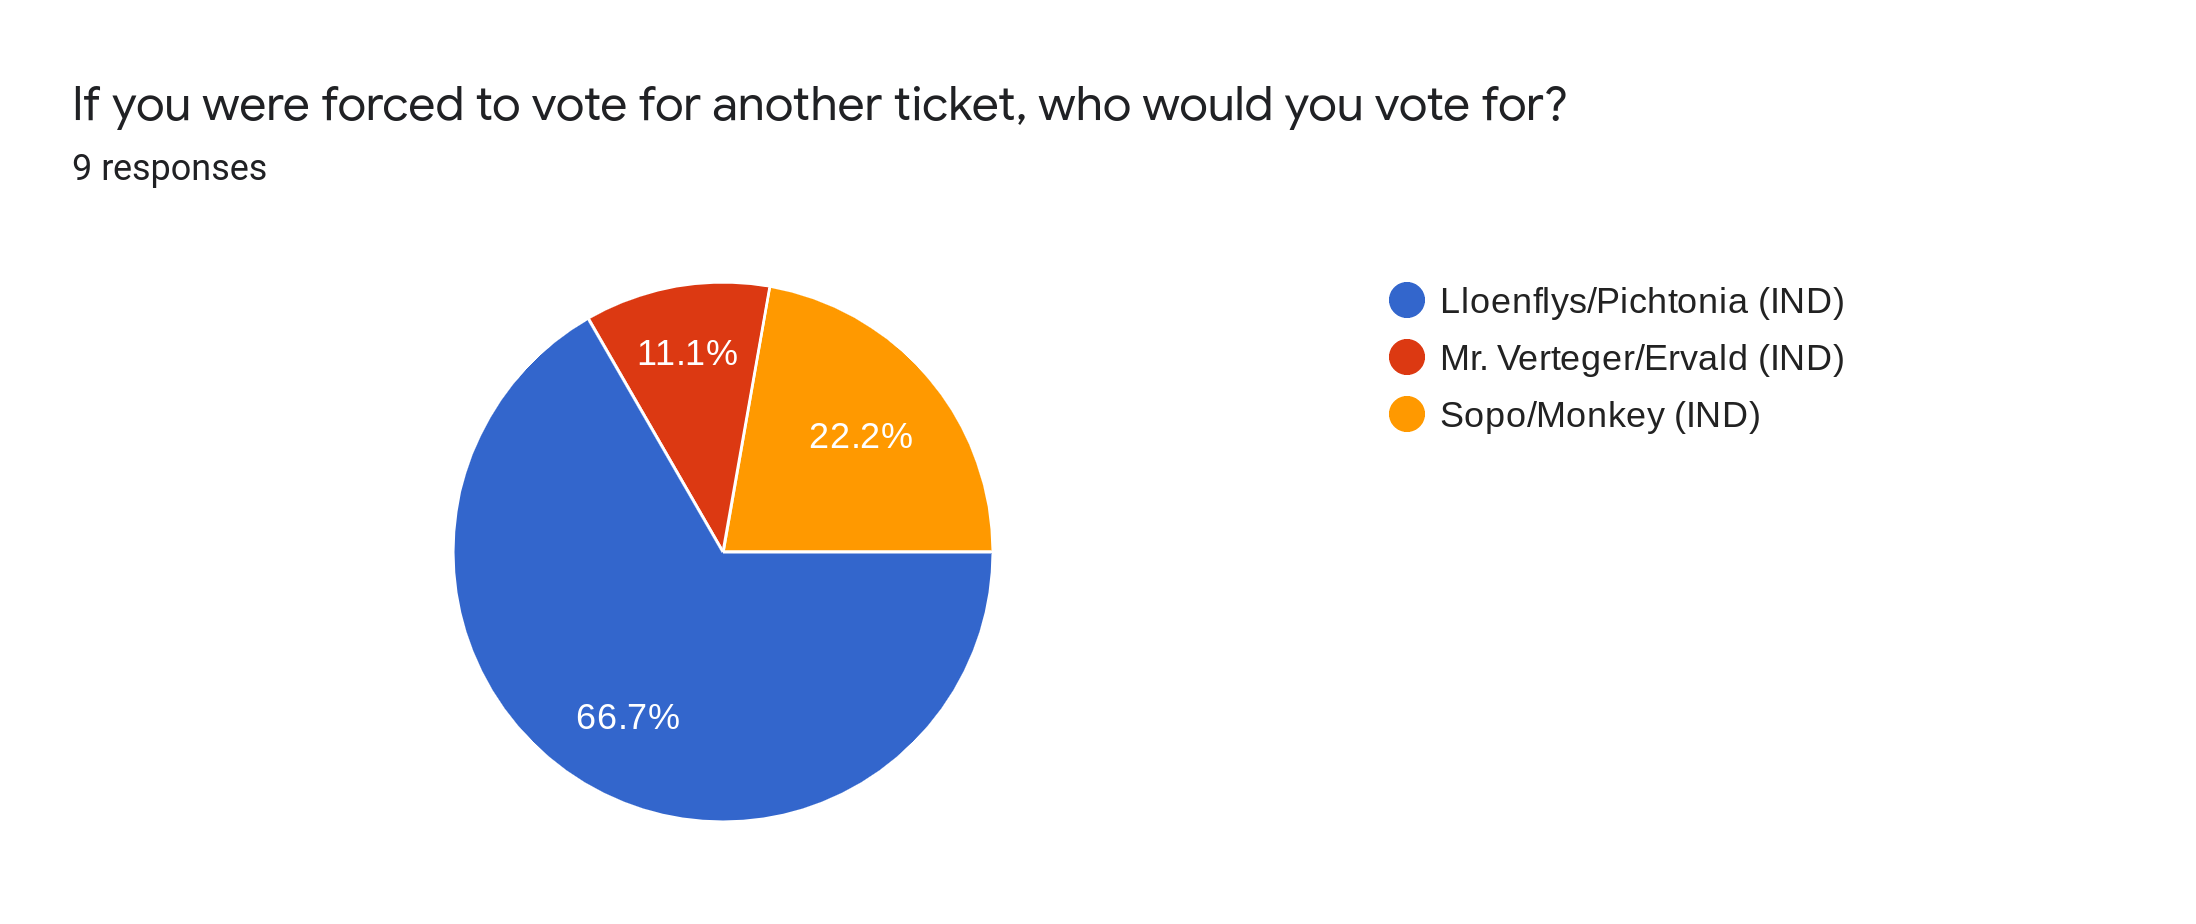 Forms response chart. Question title: If you were forced to vote for another ticket, who would you vote for?. Number of responses: 9 responses.